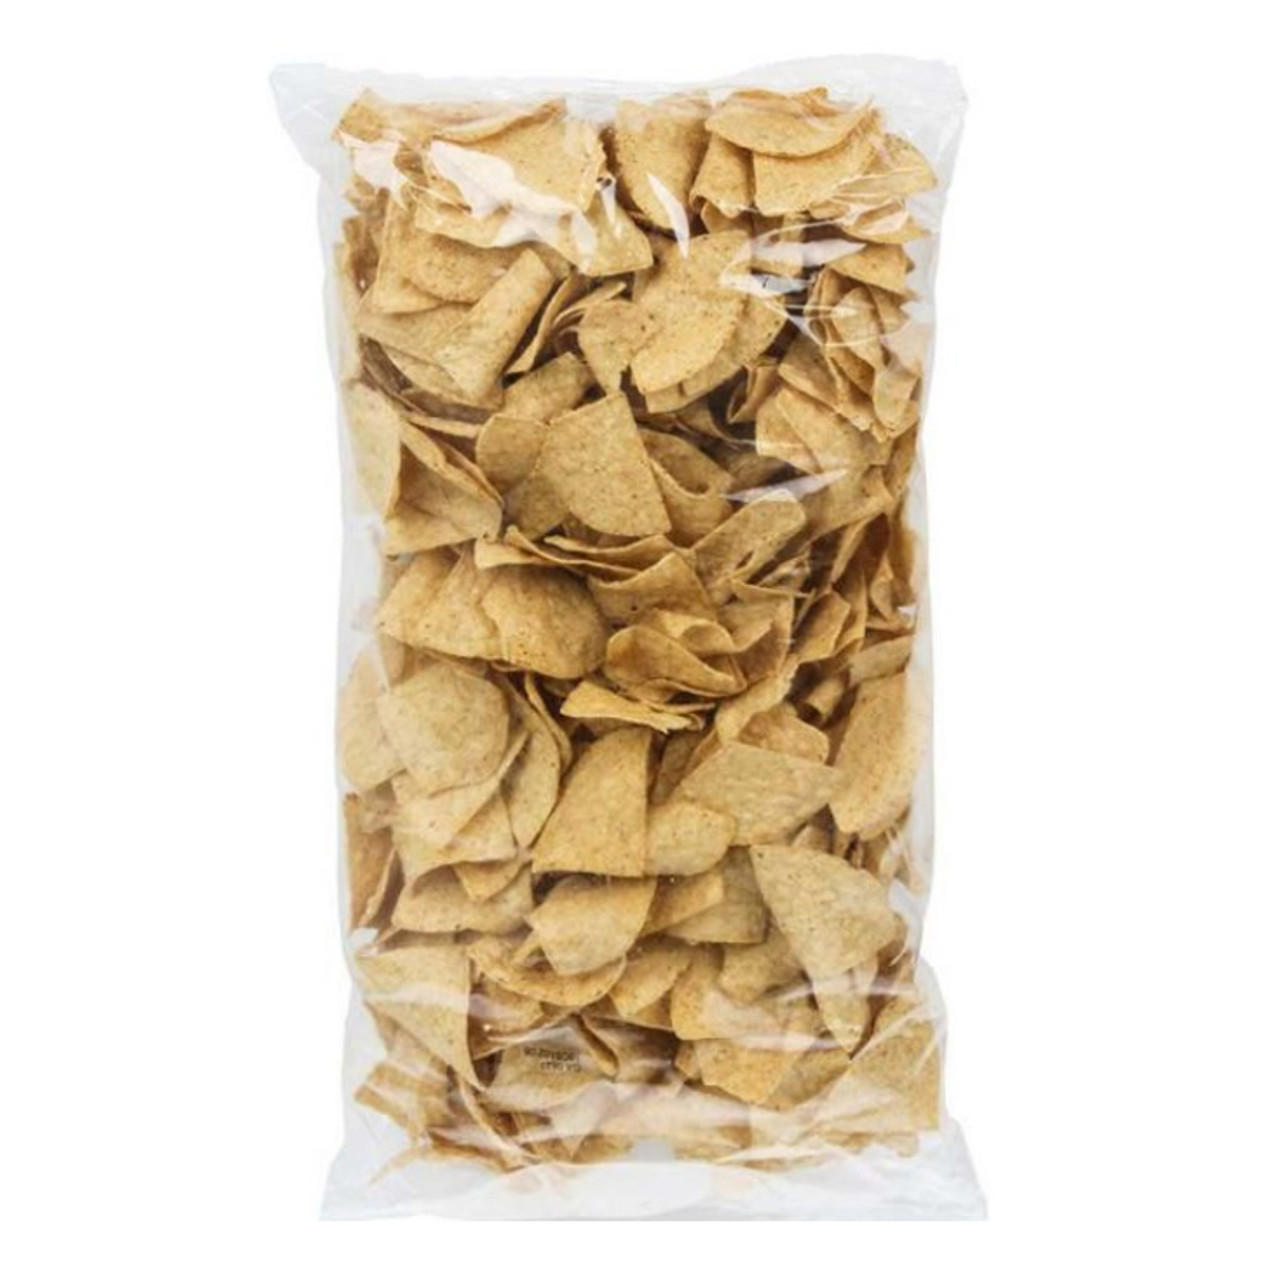 LA MEXICANA TRIANGLE SALTED TORTILLA CHIPS 500g